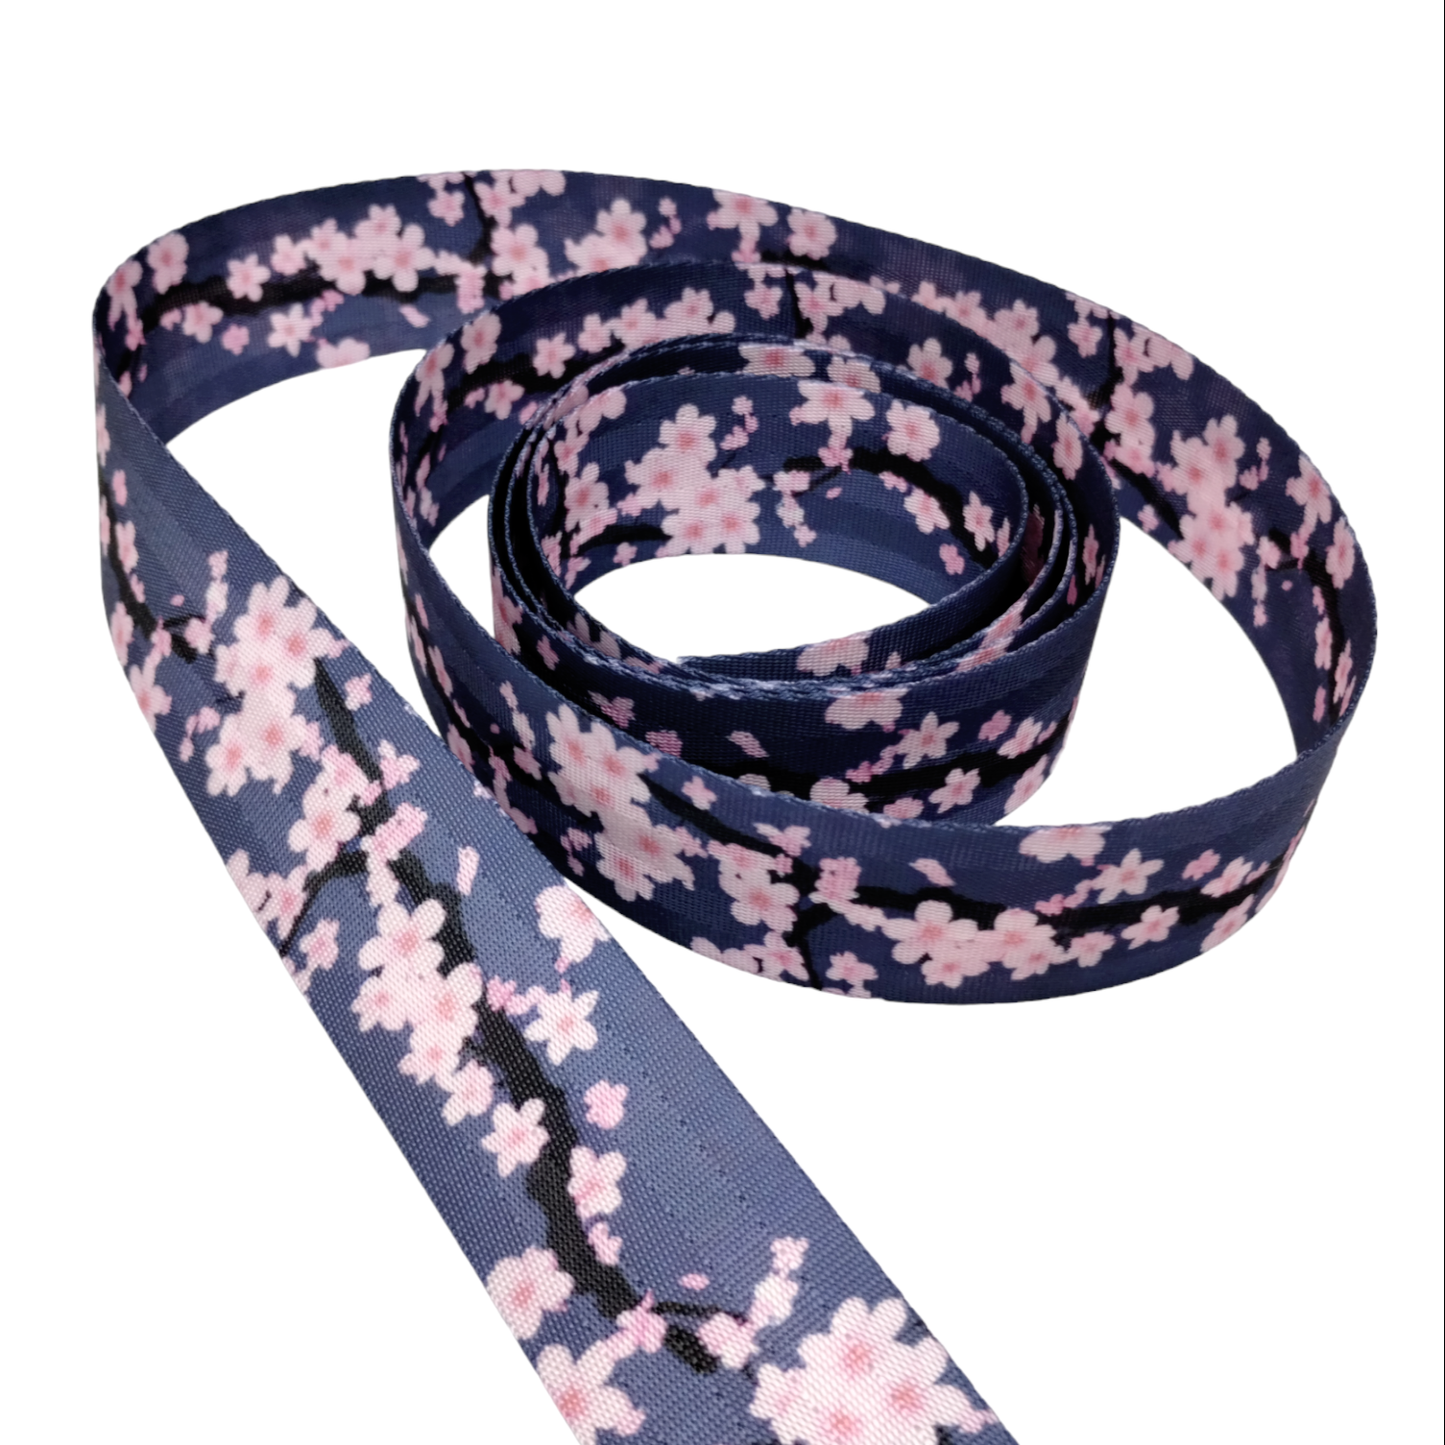 Cherry Blossom Webbing - 2 sizes, sold by the meter 38mm 1.5" Atelier Fiber Arts